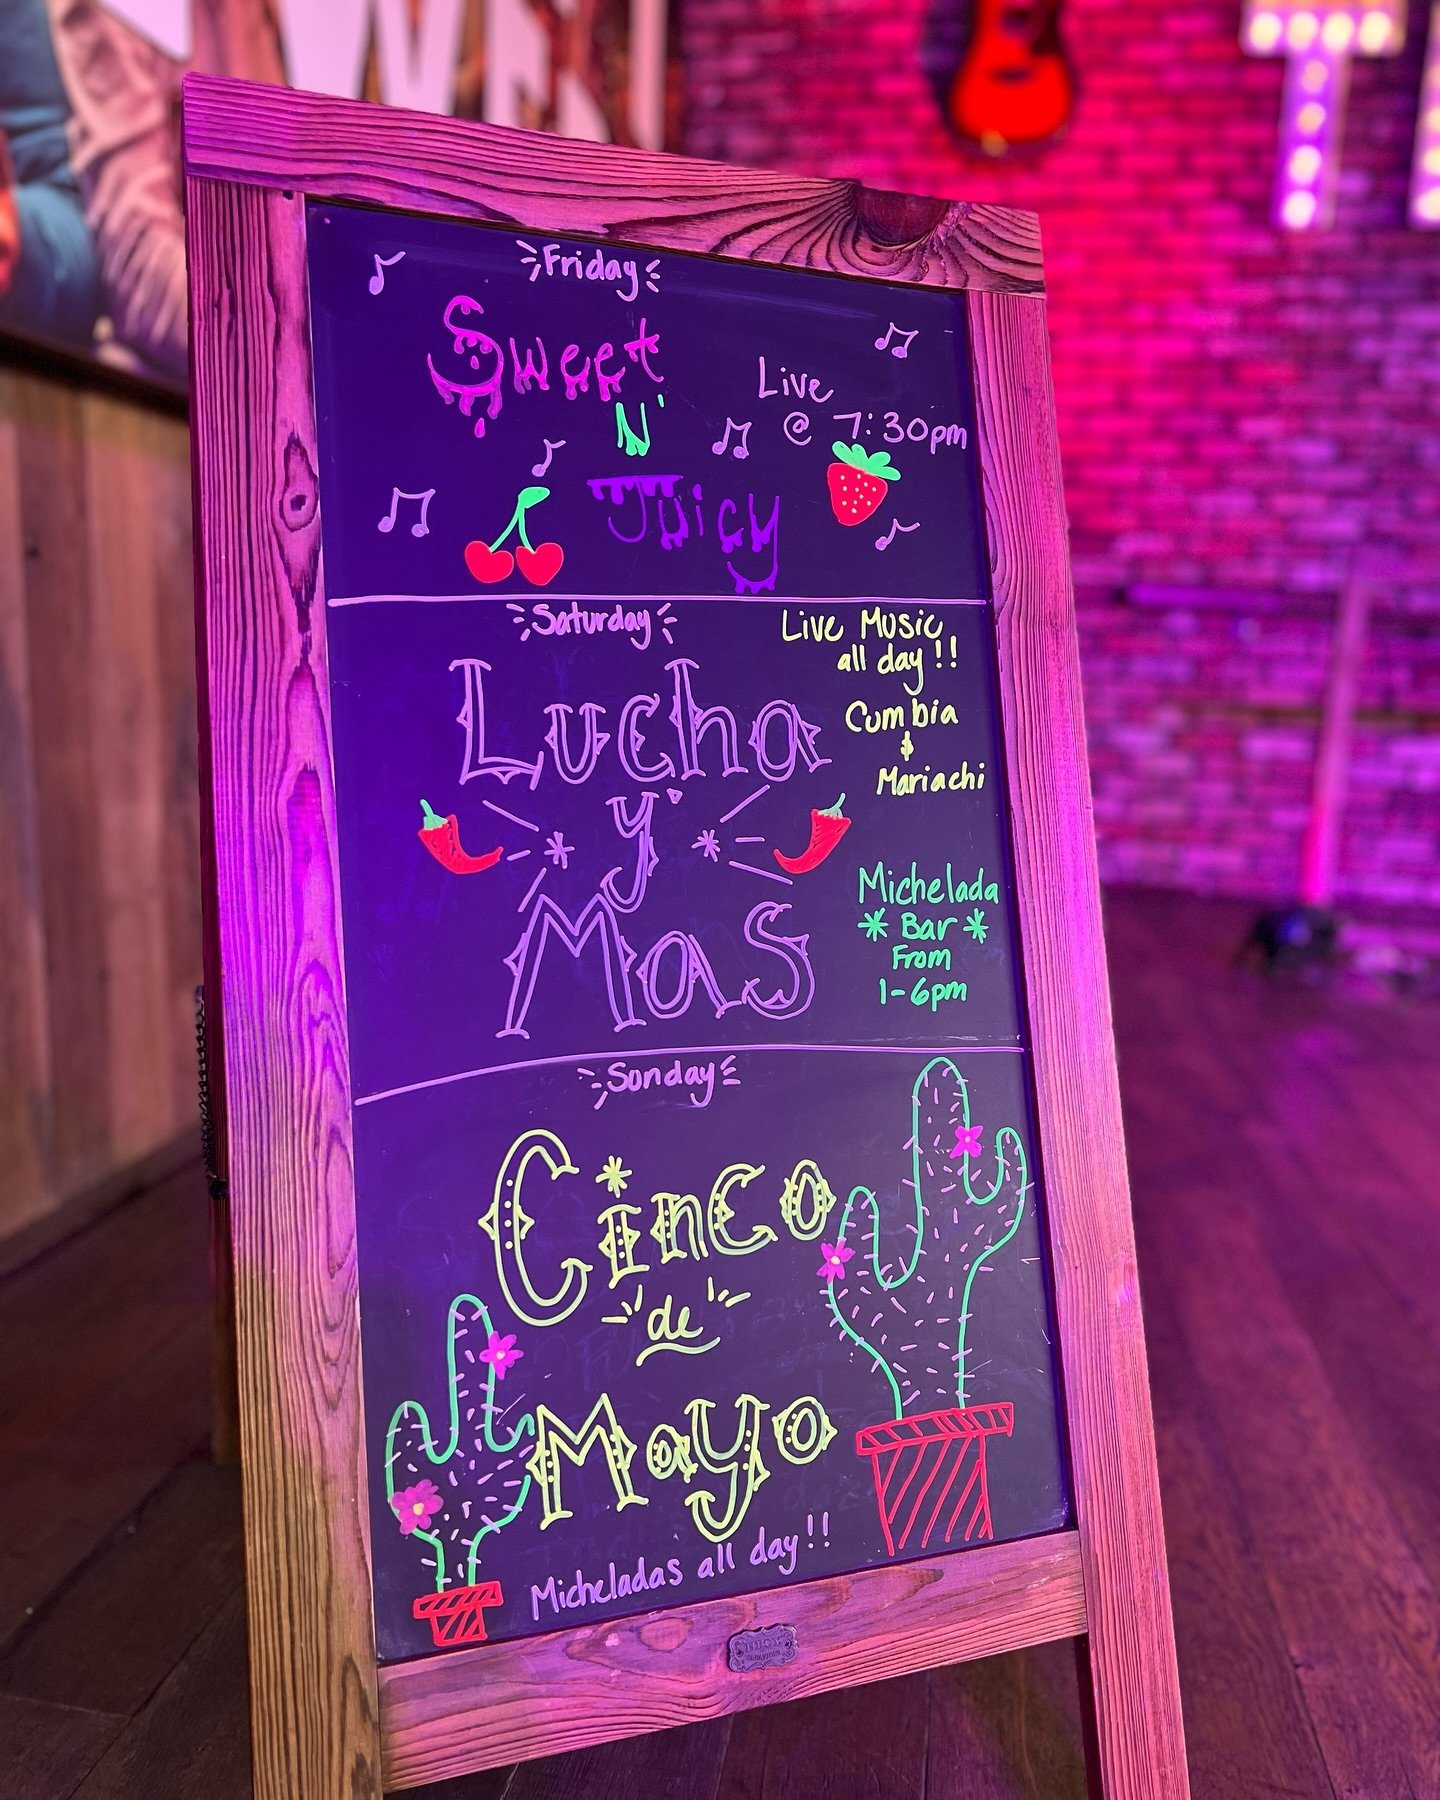 This weekends lineup is one you won&rsquo;t want to miss🍻
Join us this weekend for all your 
Cinco De Mayo Festivities 🌶️
Live music Tonight by @sweetnjuicymusic 
Cheers!!
#goodpeoplegoodtimesgreatbeer